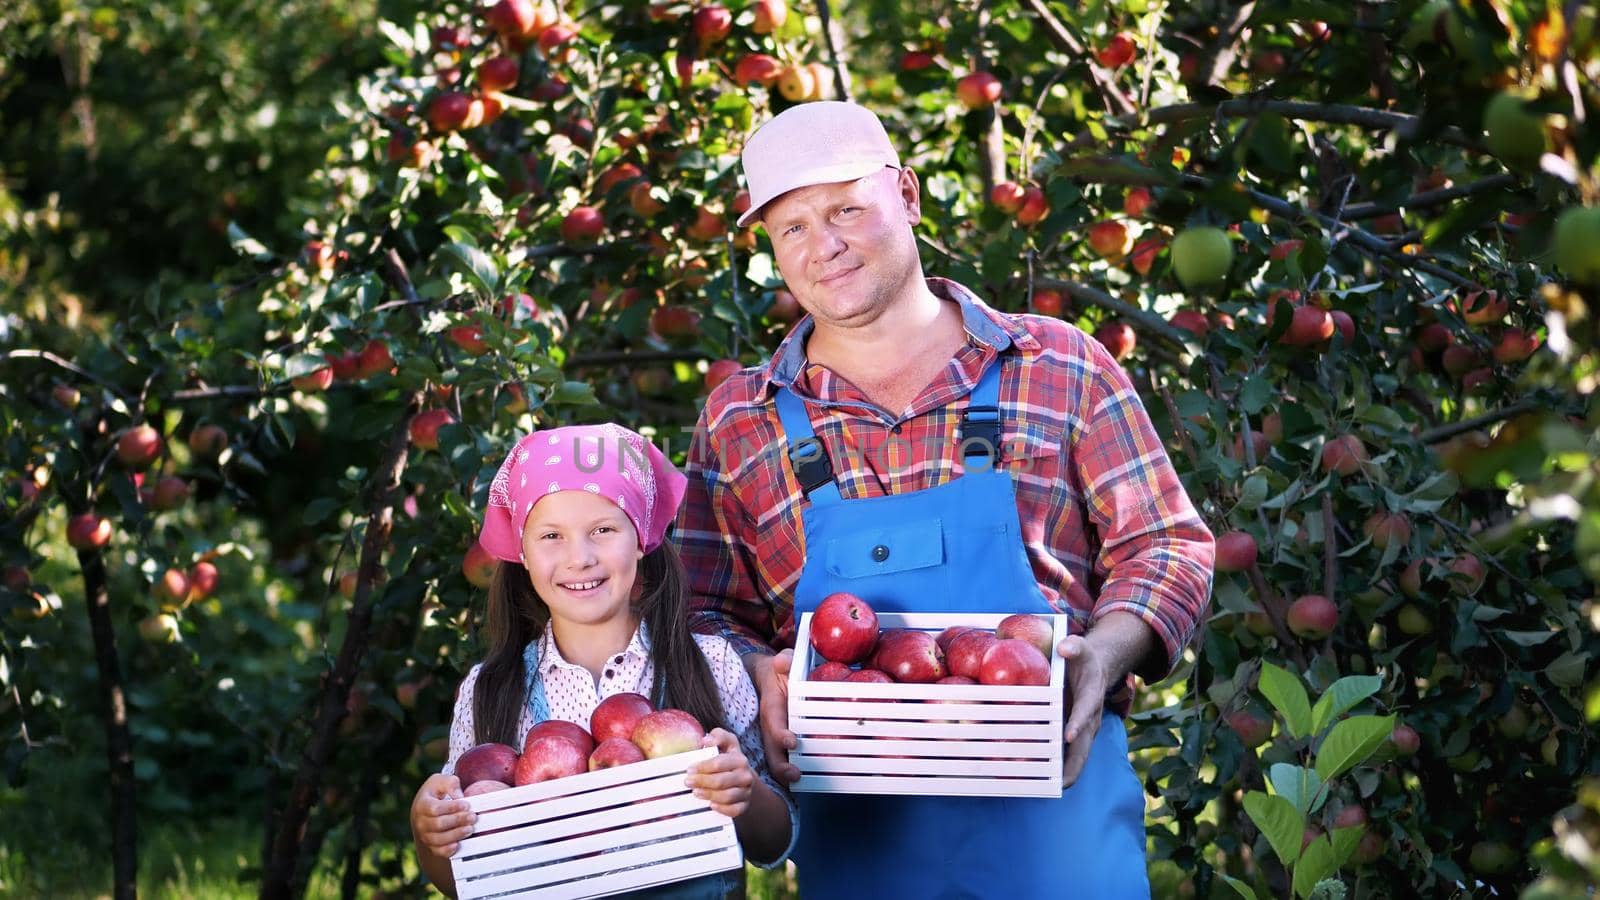 picking apples on farm, in garden. on hot, sunny autumn day. portrait of family of farmers, dad and daughter holding in their hands wooden boxes with red ripe organic apples, smiling, by djtreneryay